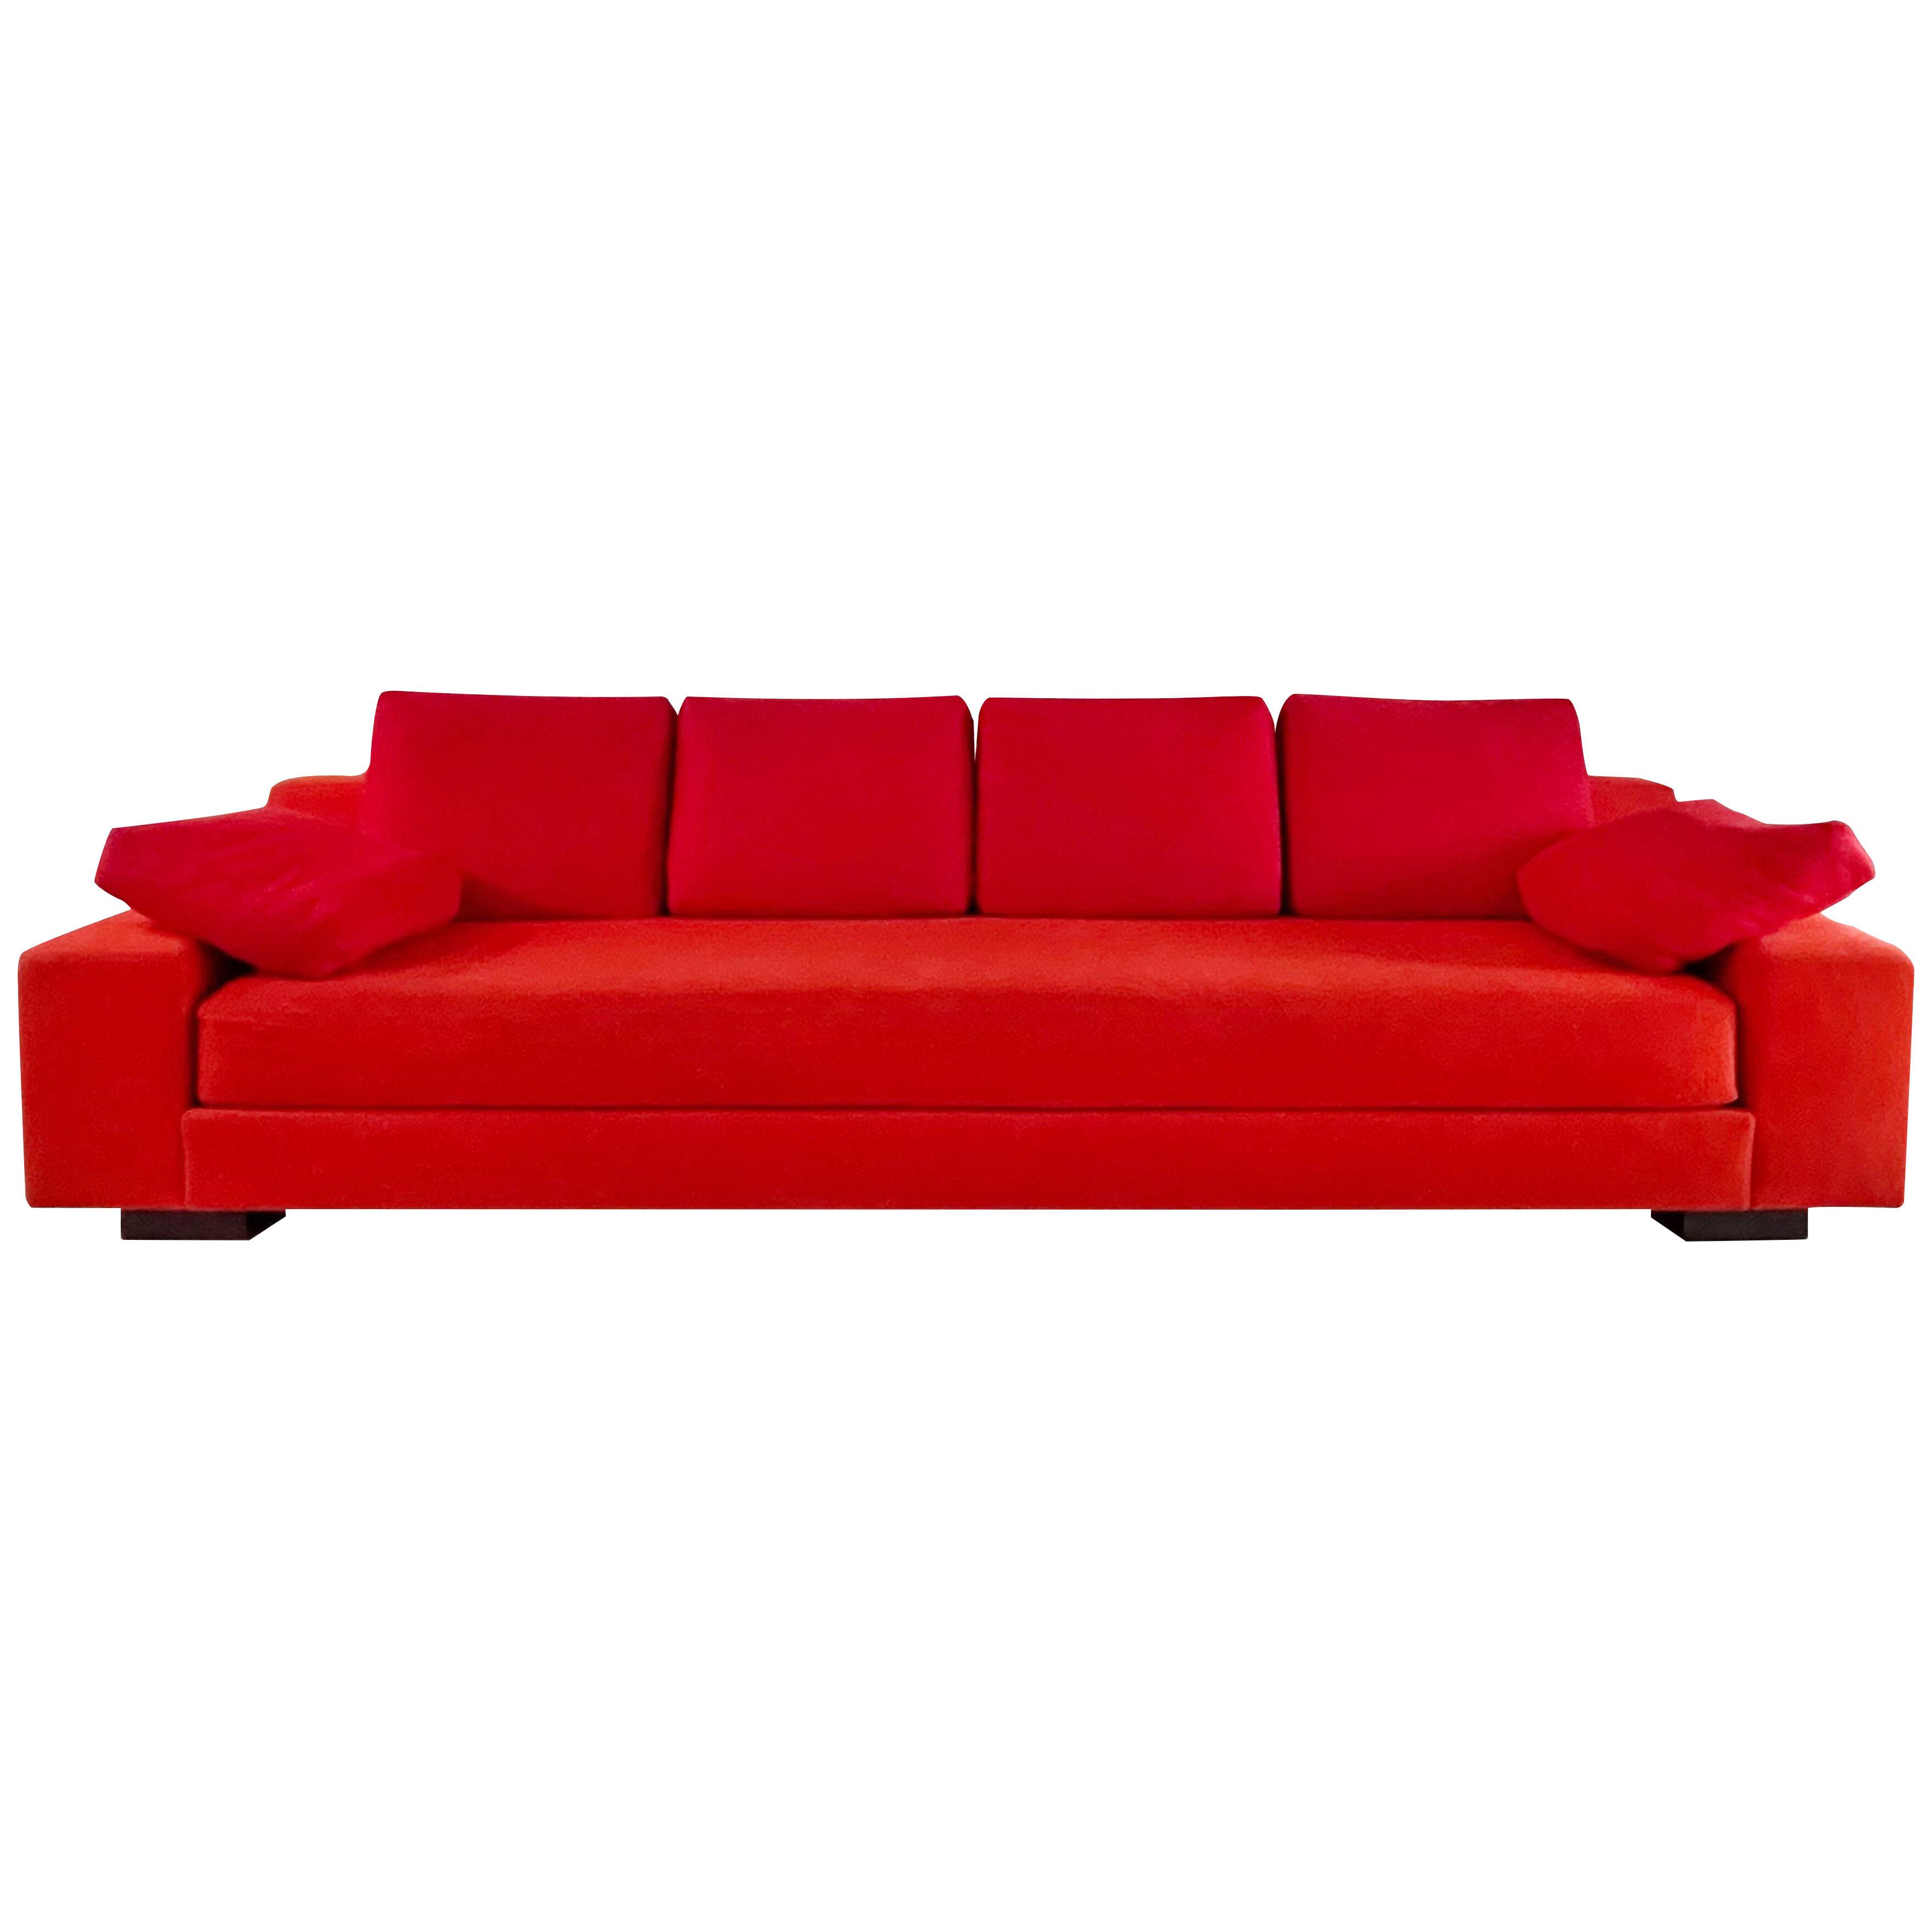 Christian Liaigre "Augustin" Sofa by Holly Hunt